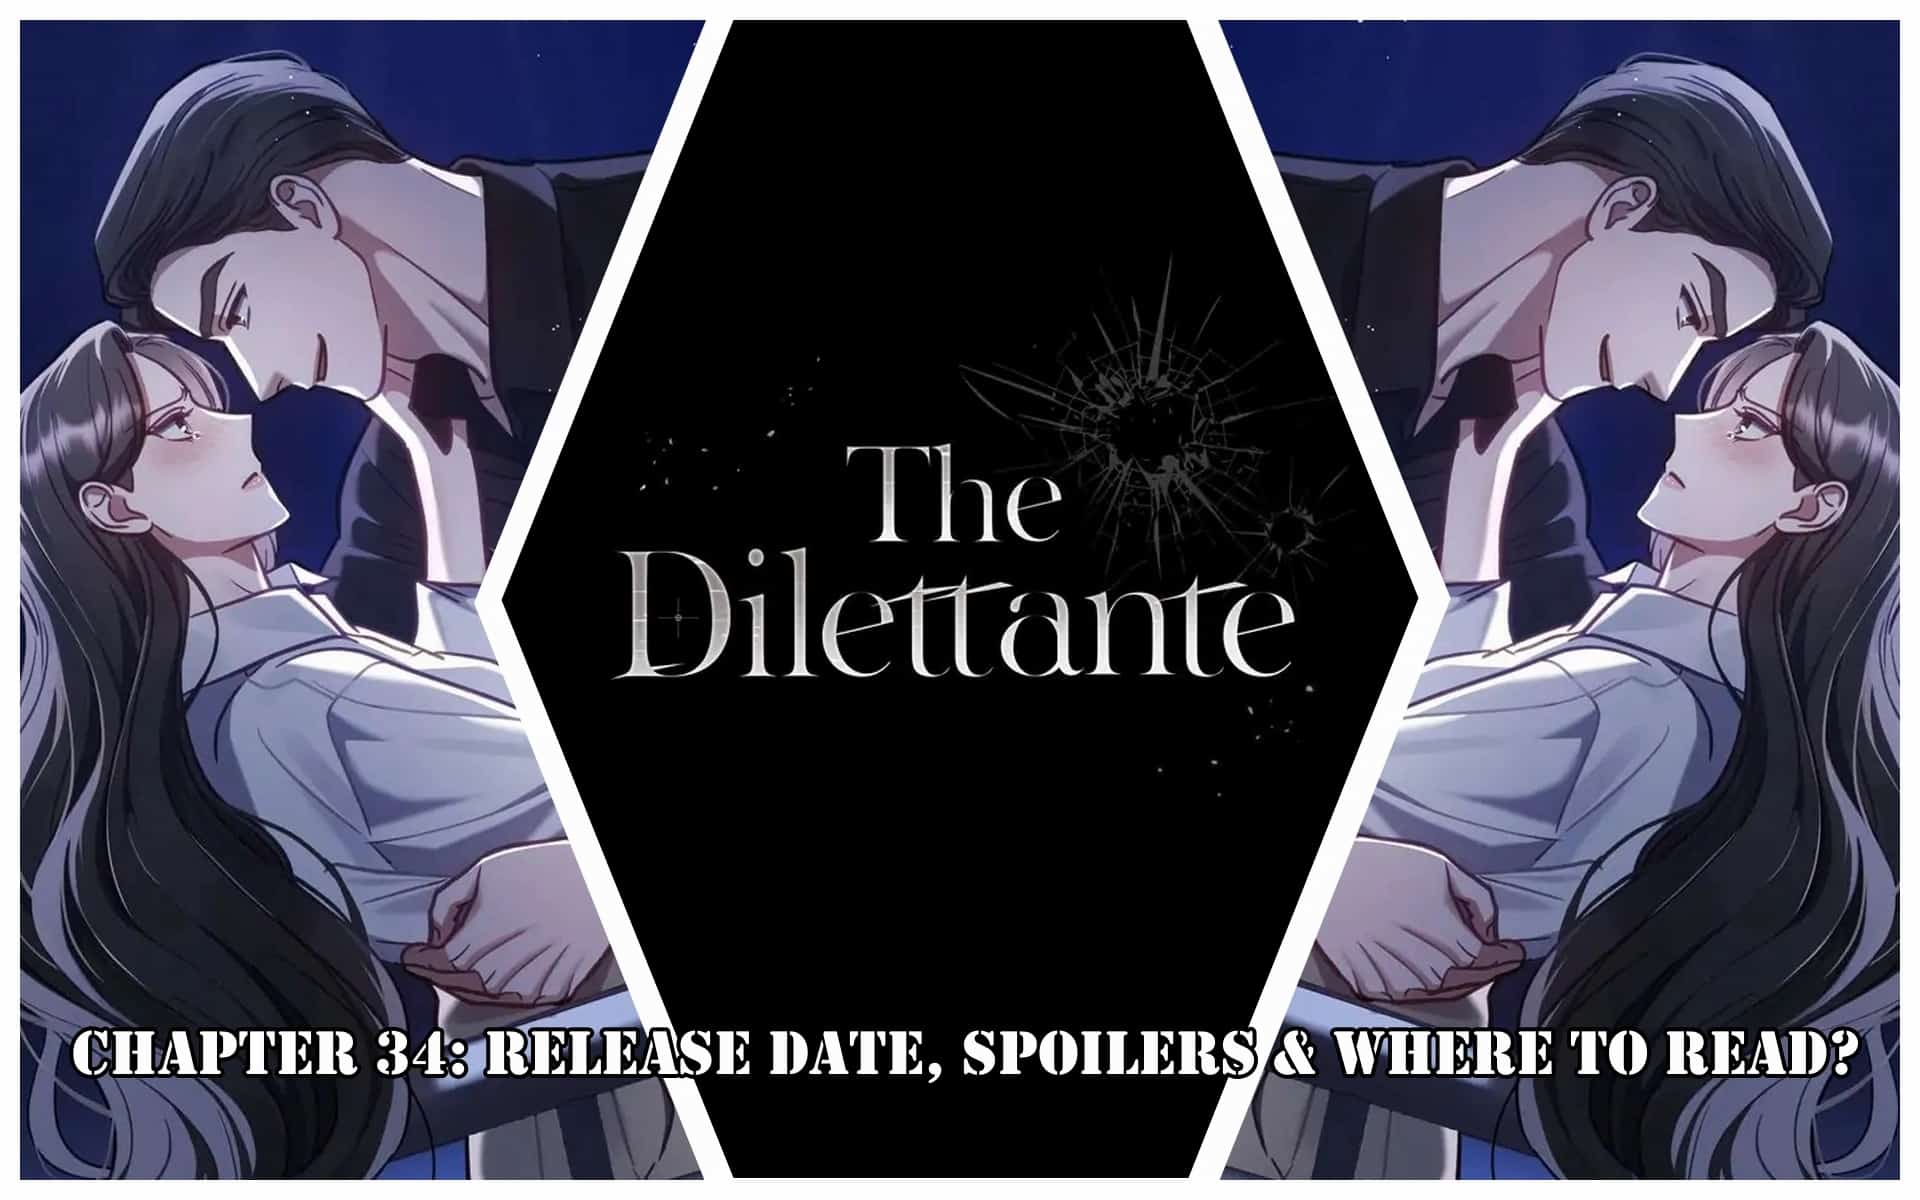 The Dilettante Chapter 34: Release Date, Spoilers & Where to Read?